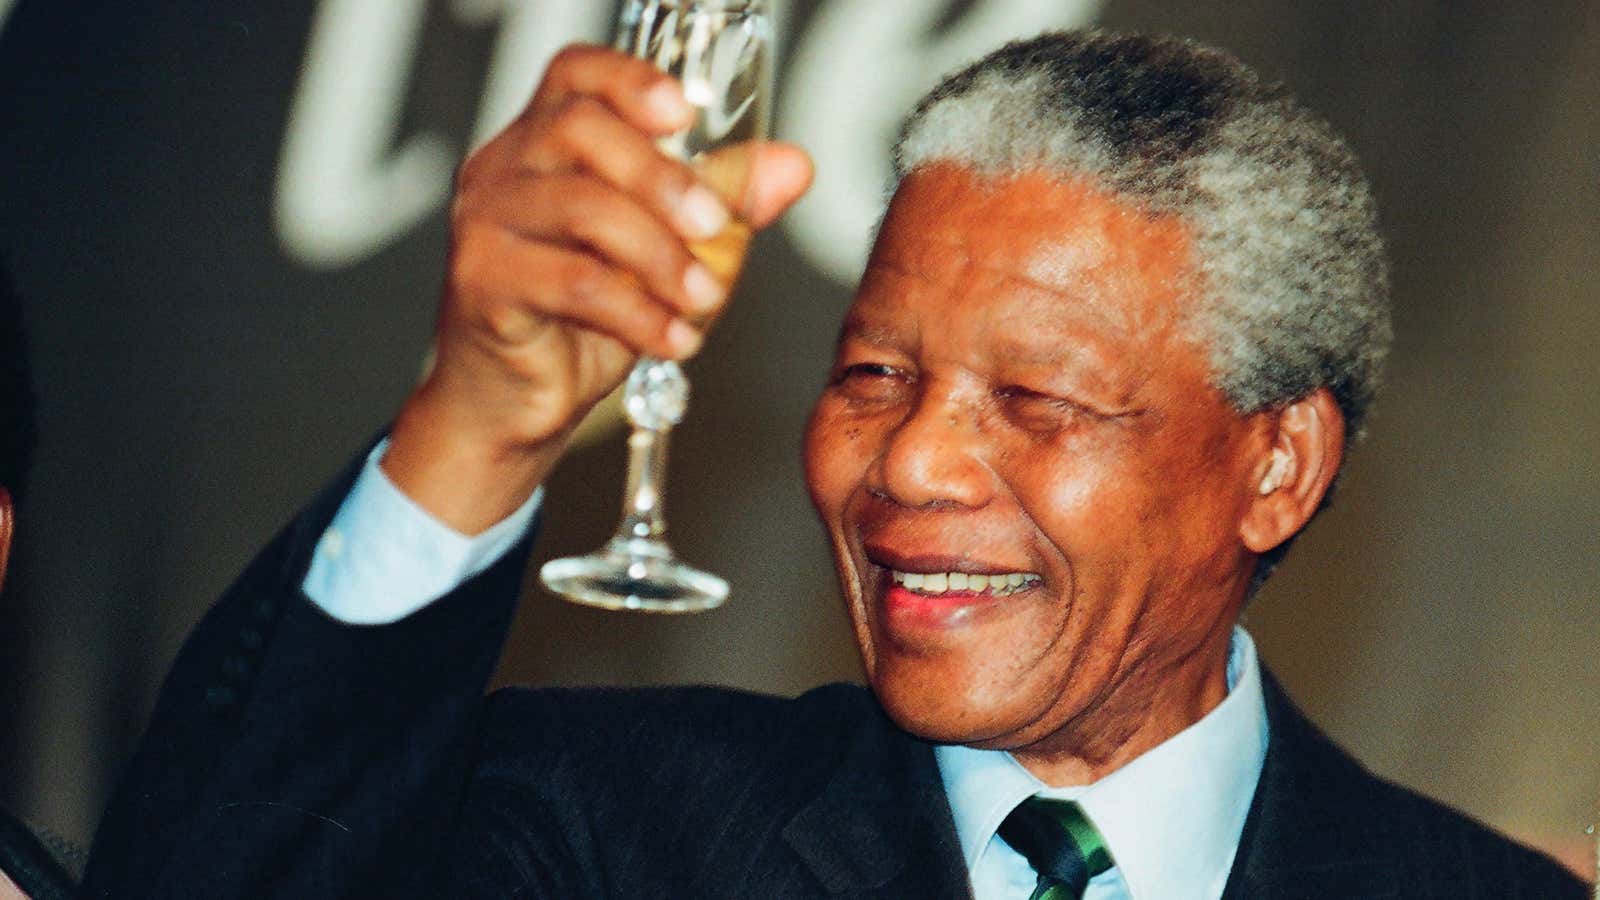 Nelson Mandela ushered in freedom, and a system vulnerable to corruption.